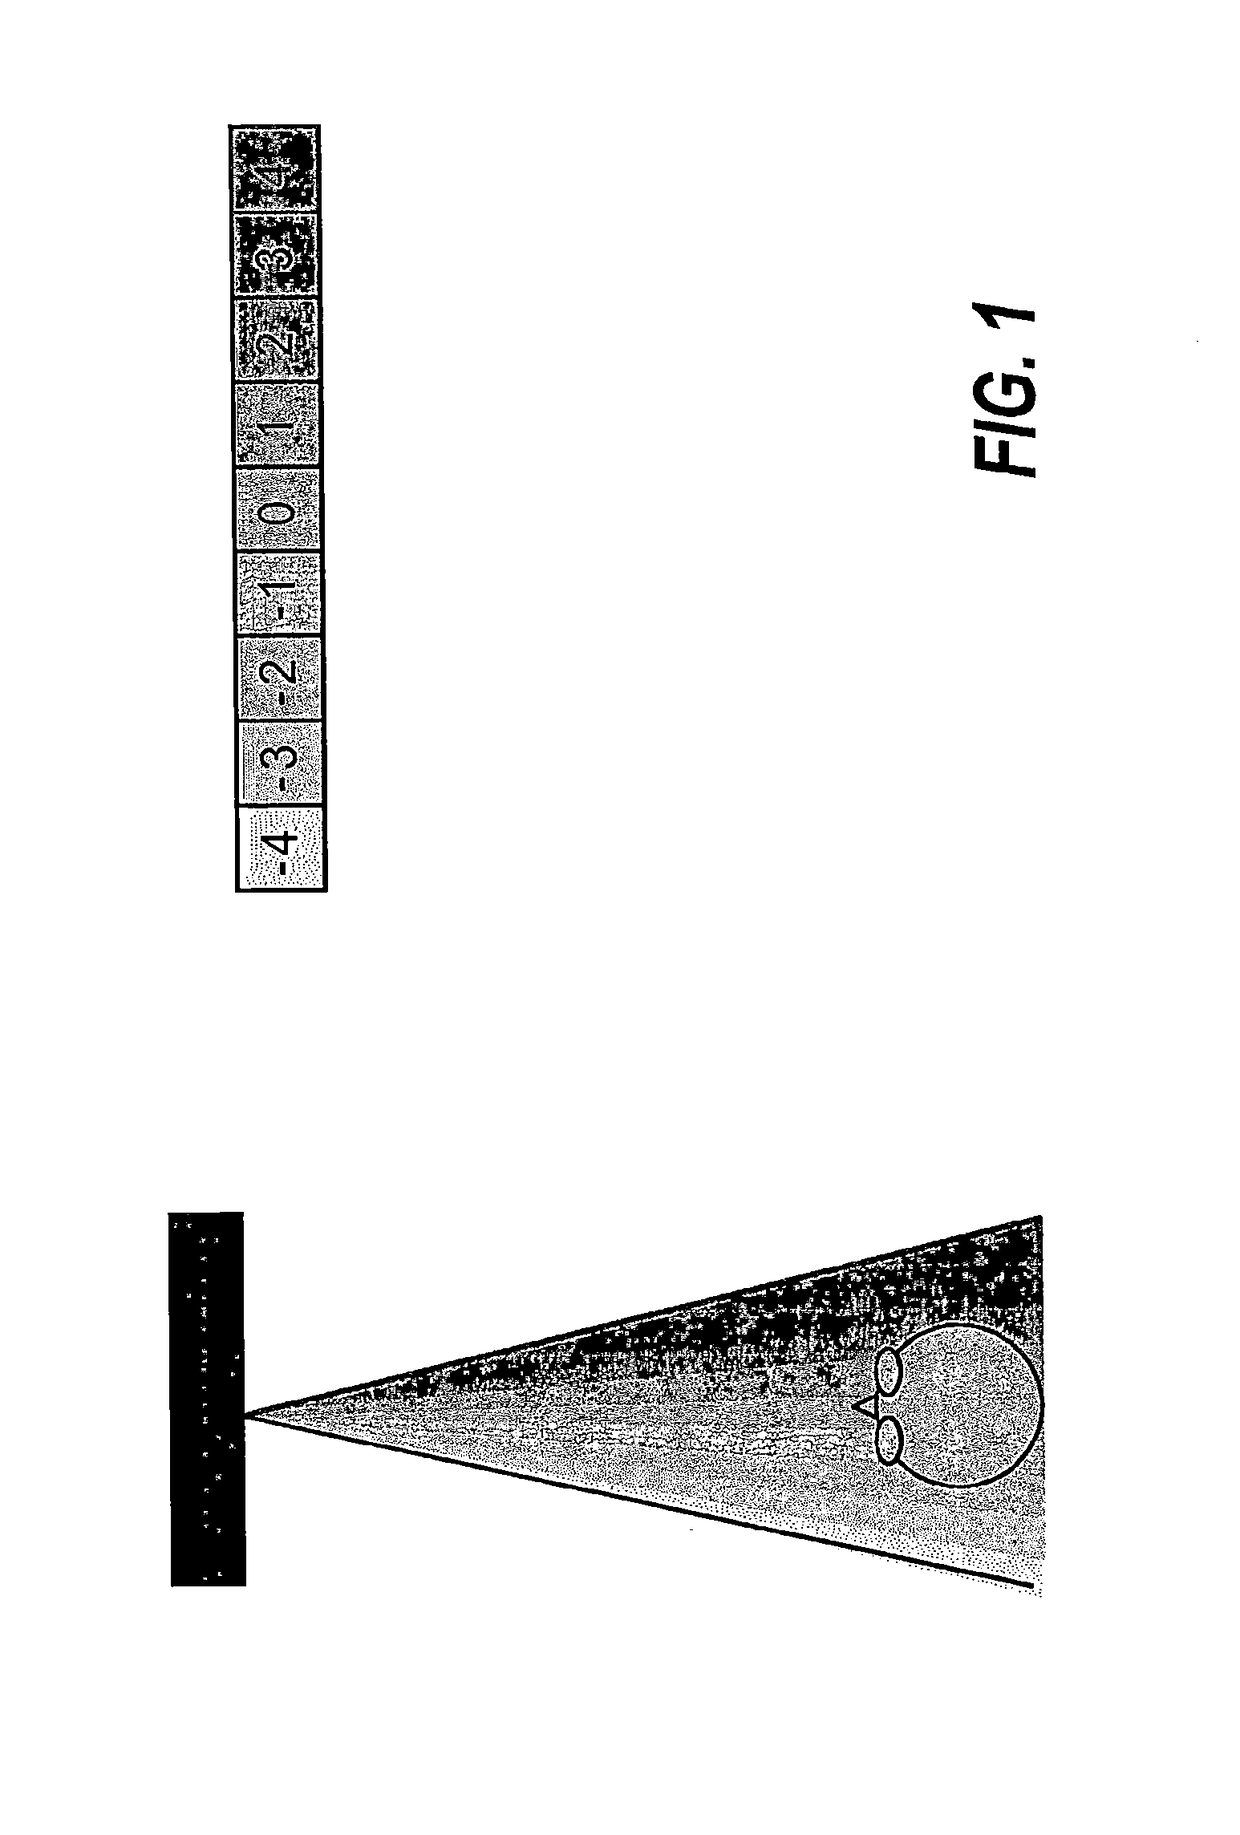 Method and apparatus for generating a three dimensional image